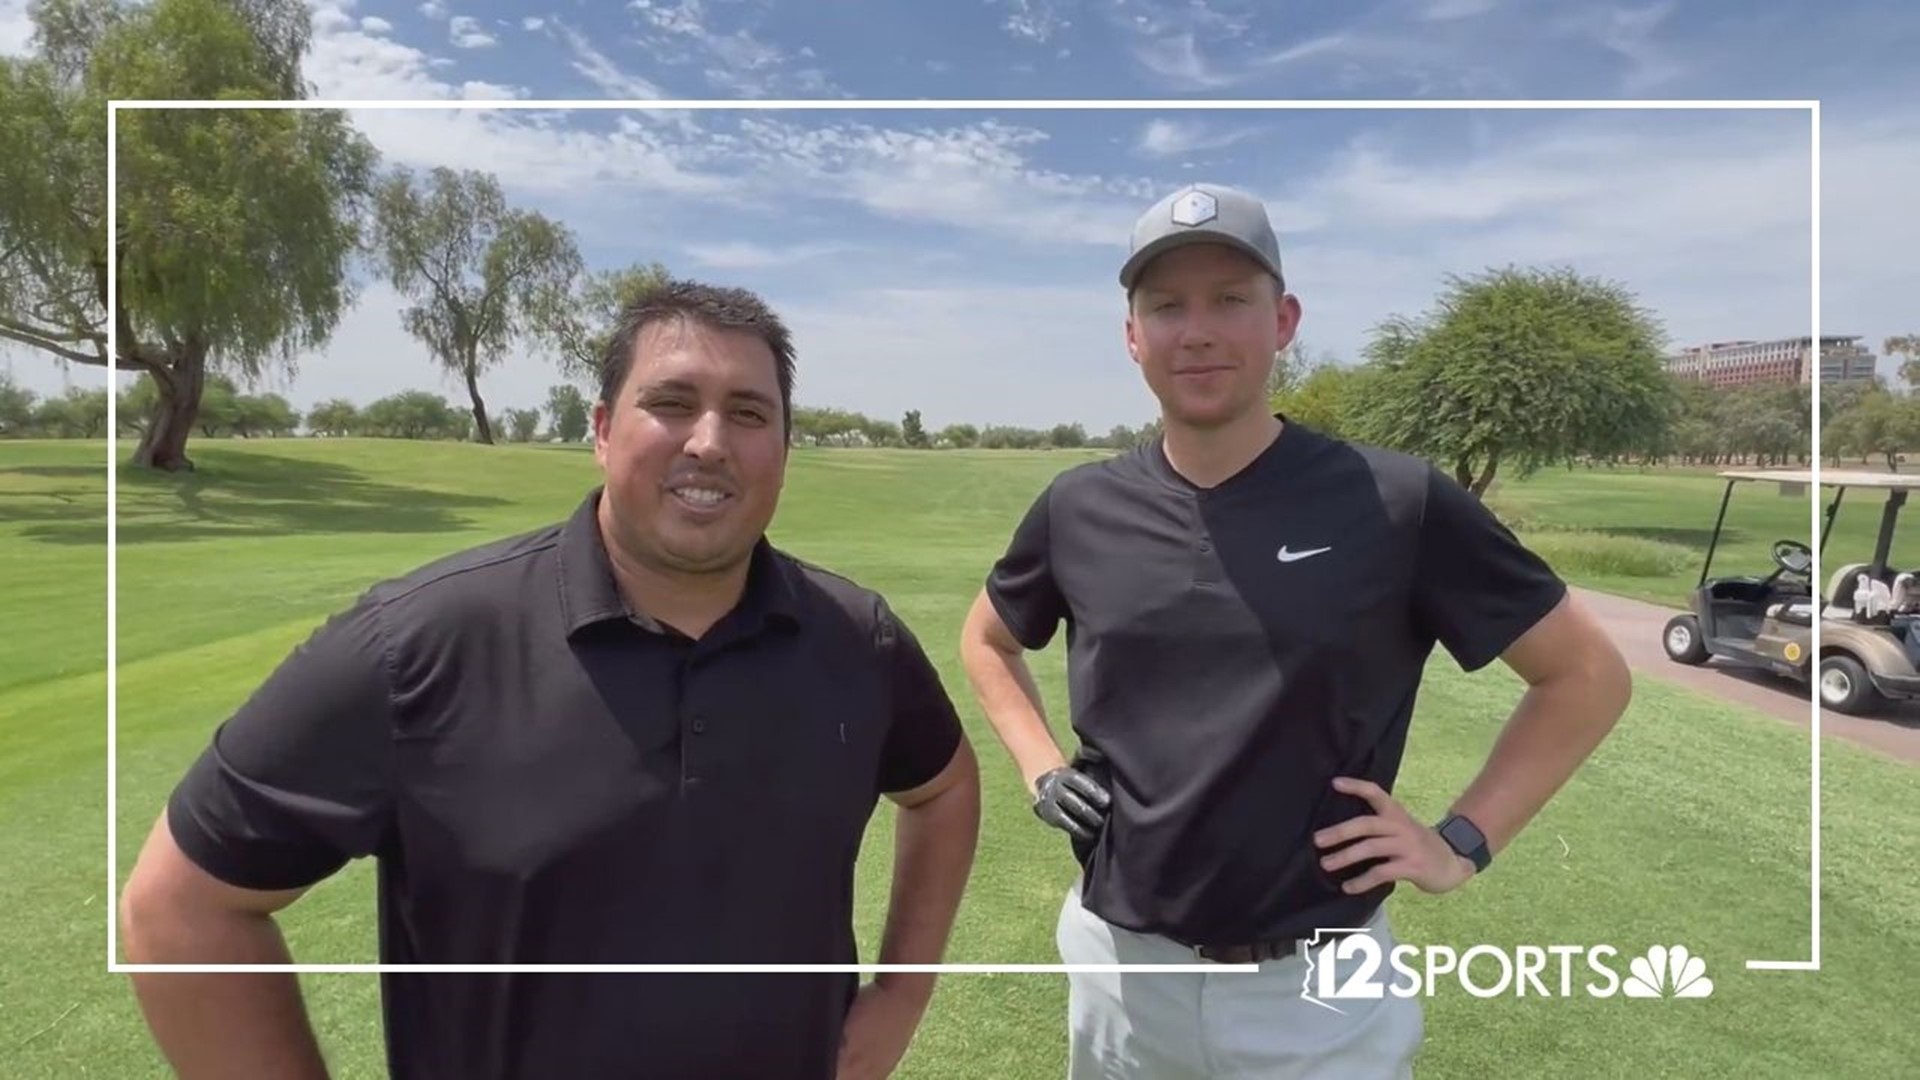 The Cardinals just signed QB Kyler Murray to a monster extension. Cam Cox and Luke Lyddon took a moment between tee shots to share their thoughts on the news.